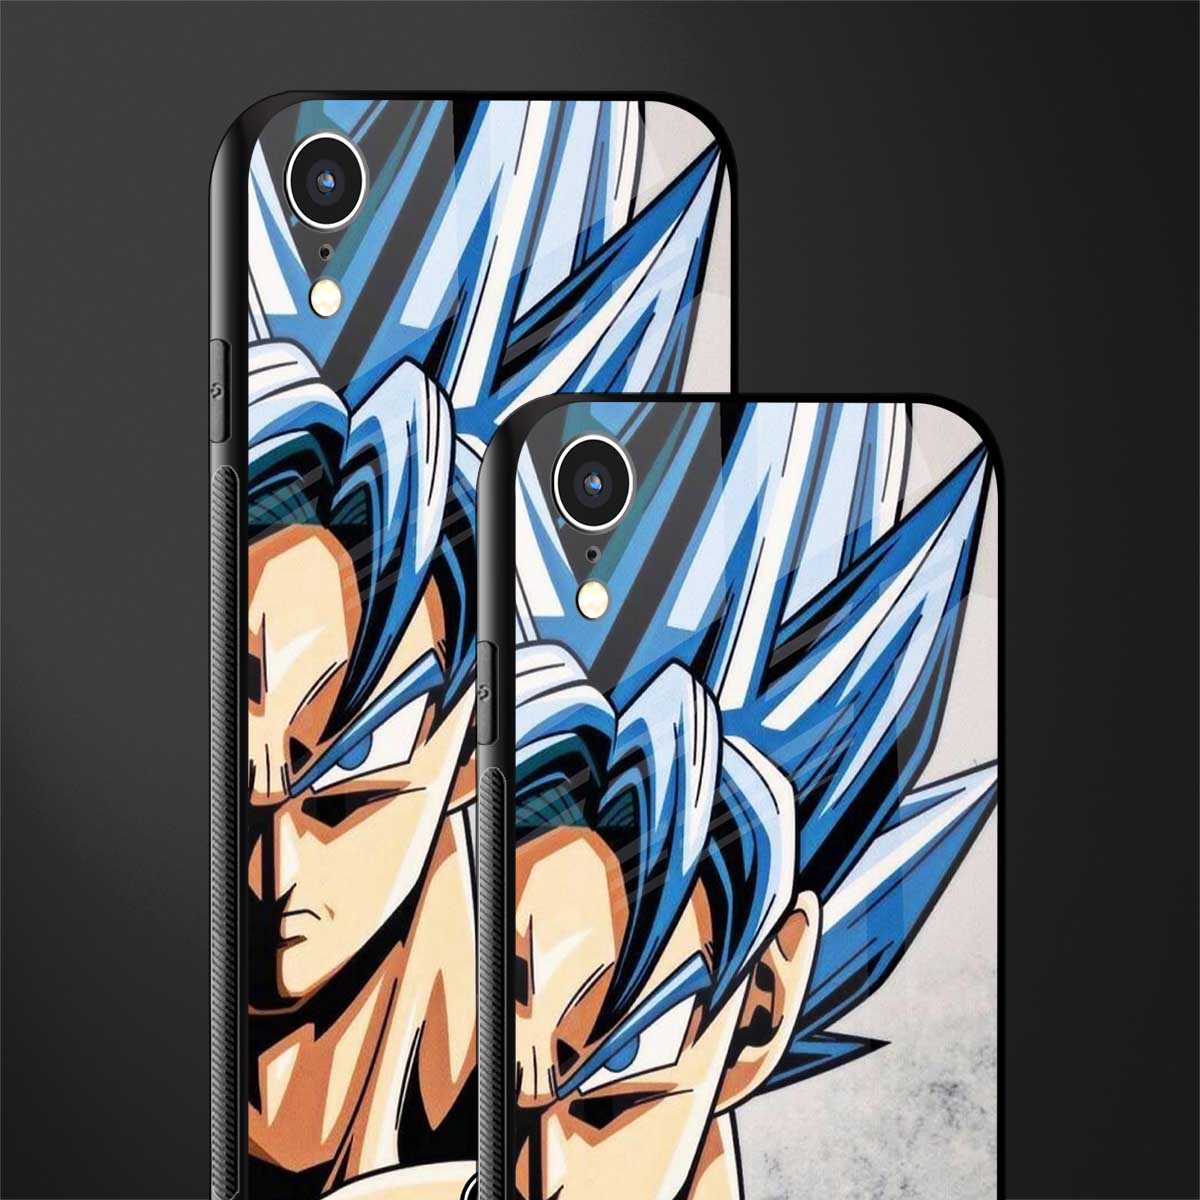 Goku Dragon Ball Z Anime Phone Cover for iPhone XR  Glass Case   Mymerchandize